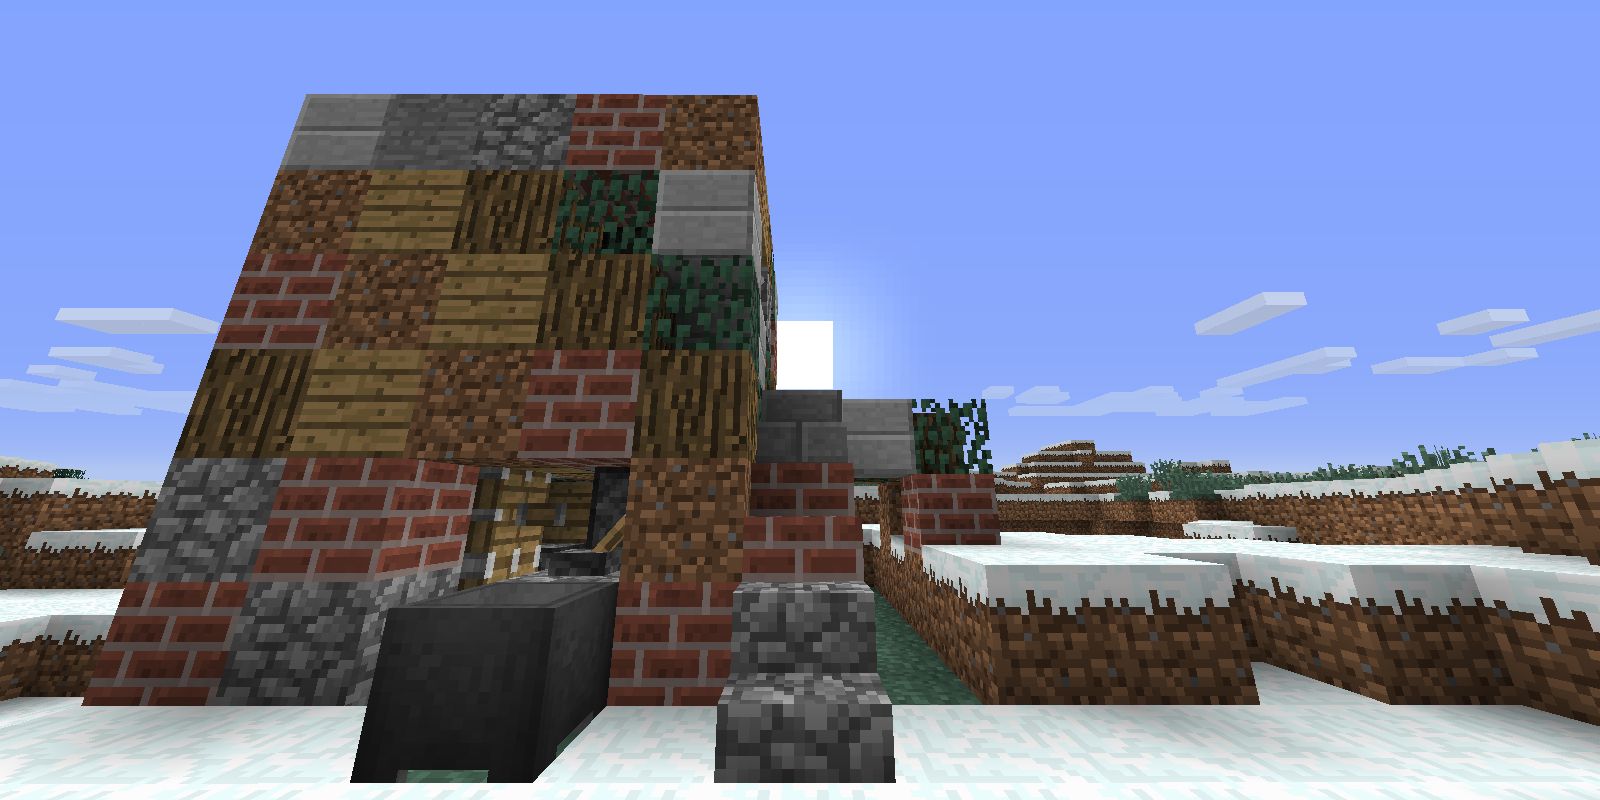 A badly built structure in Minecraft